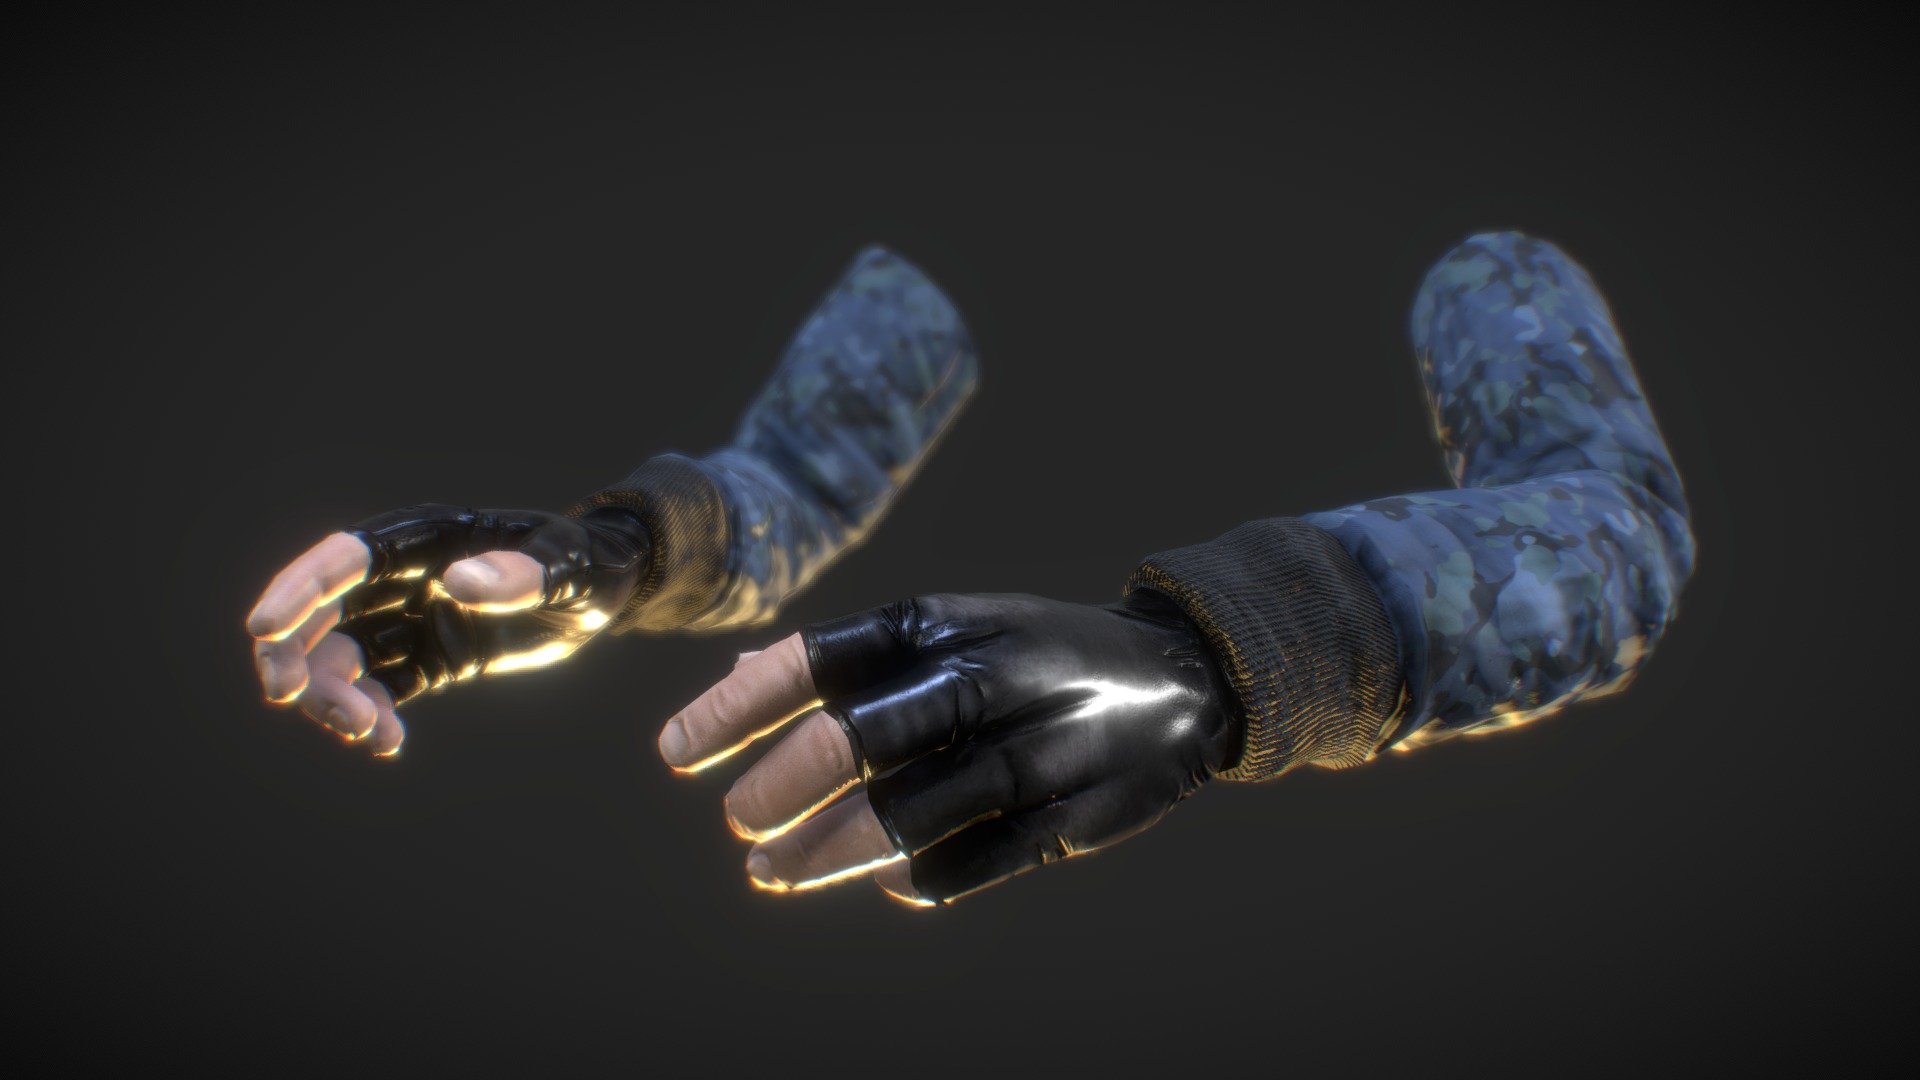 Just a retextured version of :
https://sketchfab.com/3d-models/fps-arms-08ec4403a47645d8ad80633abf13d39d

4k textures

weapons and animations coming soon.....

note : if you dont like me to re-texturing or re-upleading your models just nofity me and i will gladly remove it

all right goes to : 3DMaesen - FPS Arms - Download Free 3D model by J_ (@J_0) 3d model